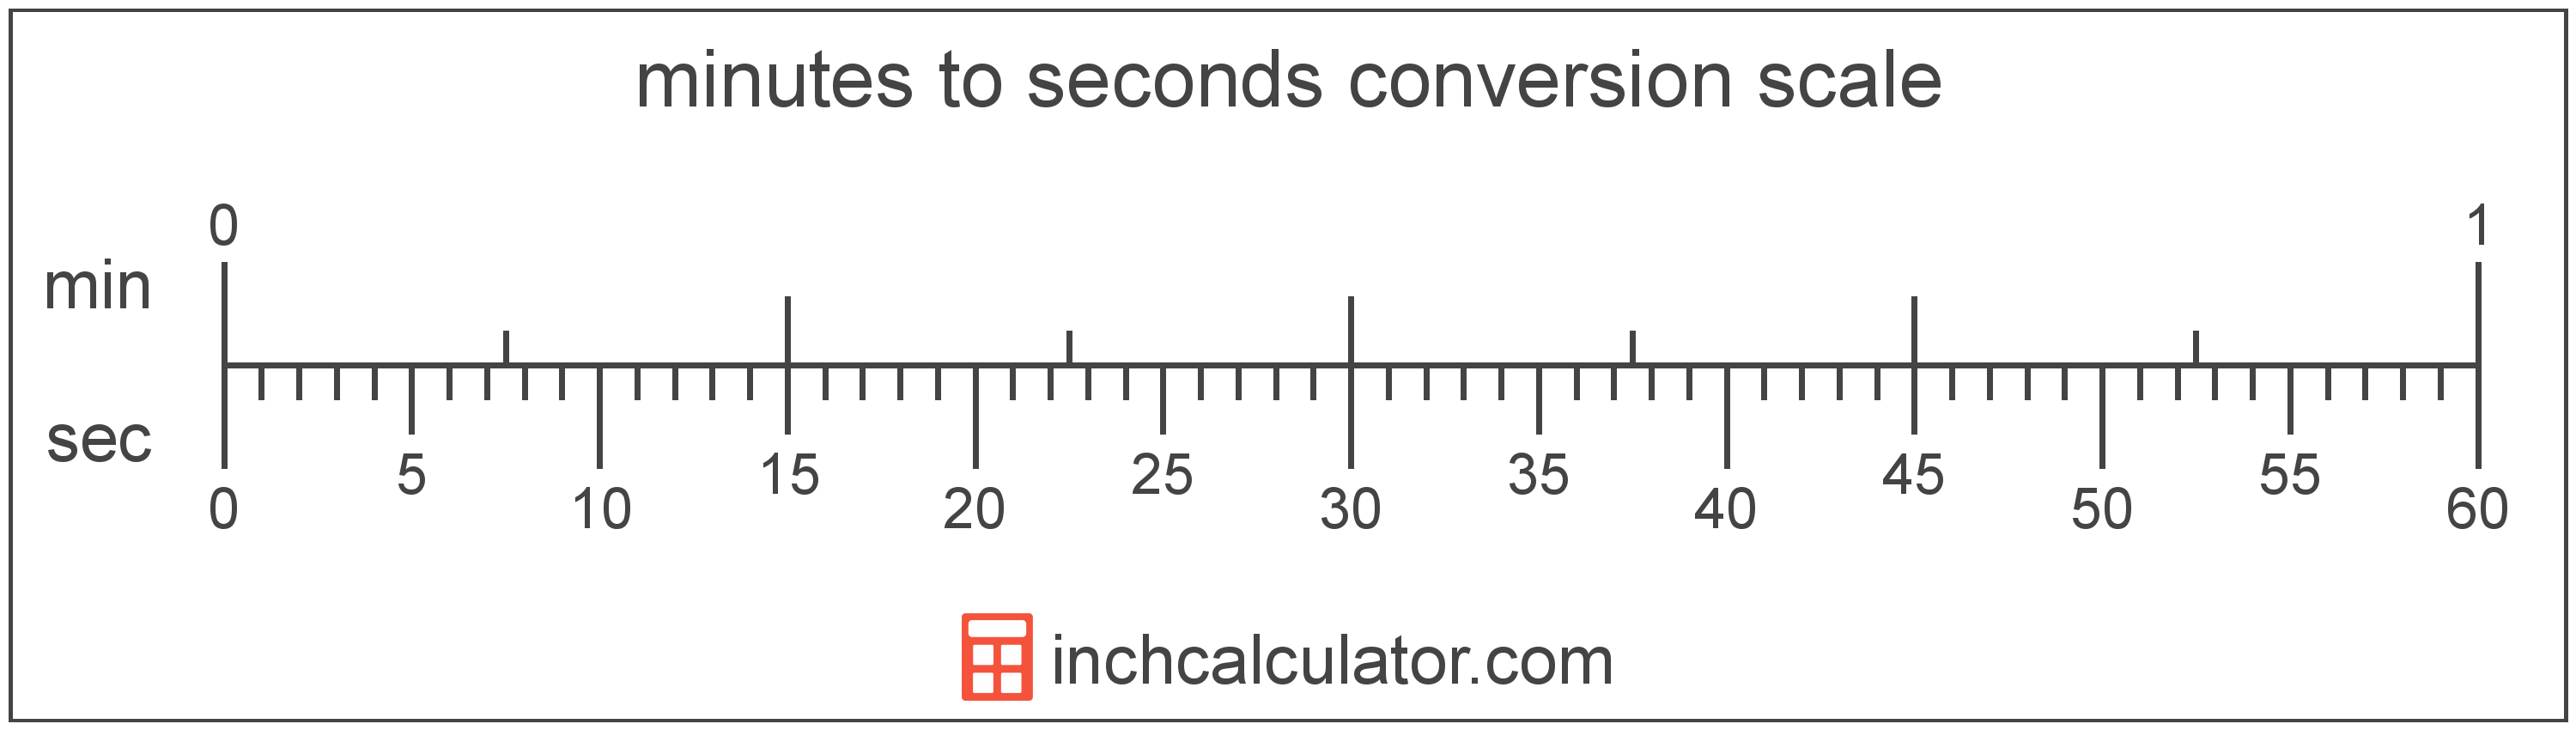 conversion scale showing seconds and equivalent minutes time values